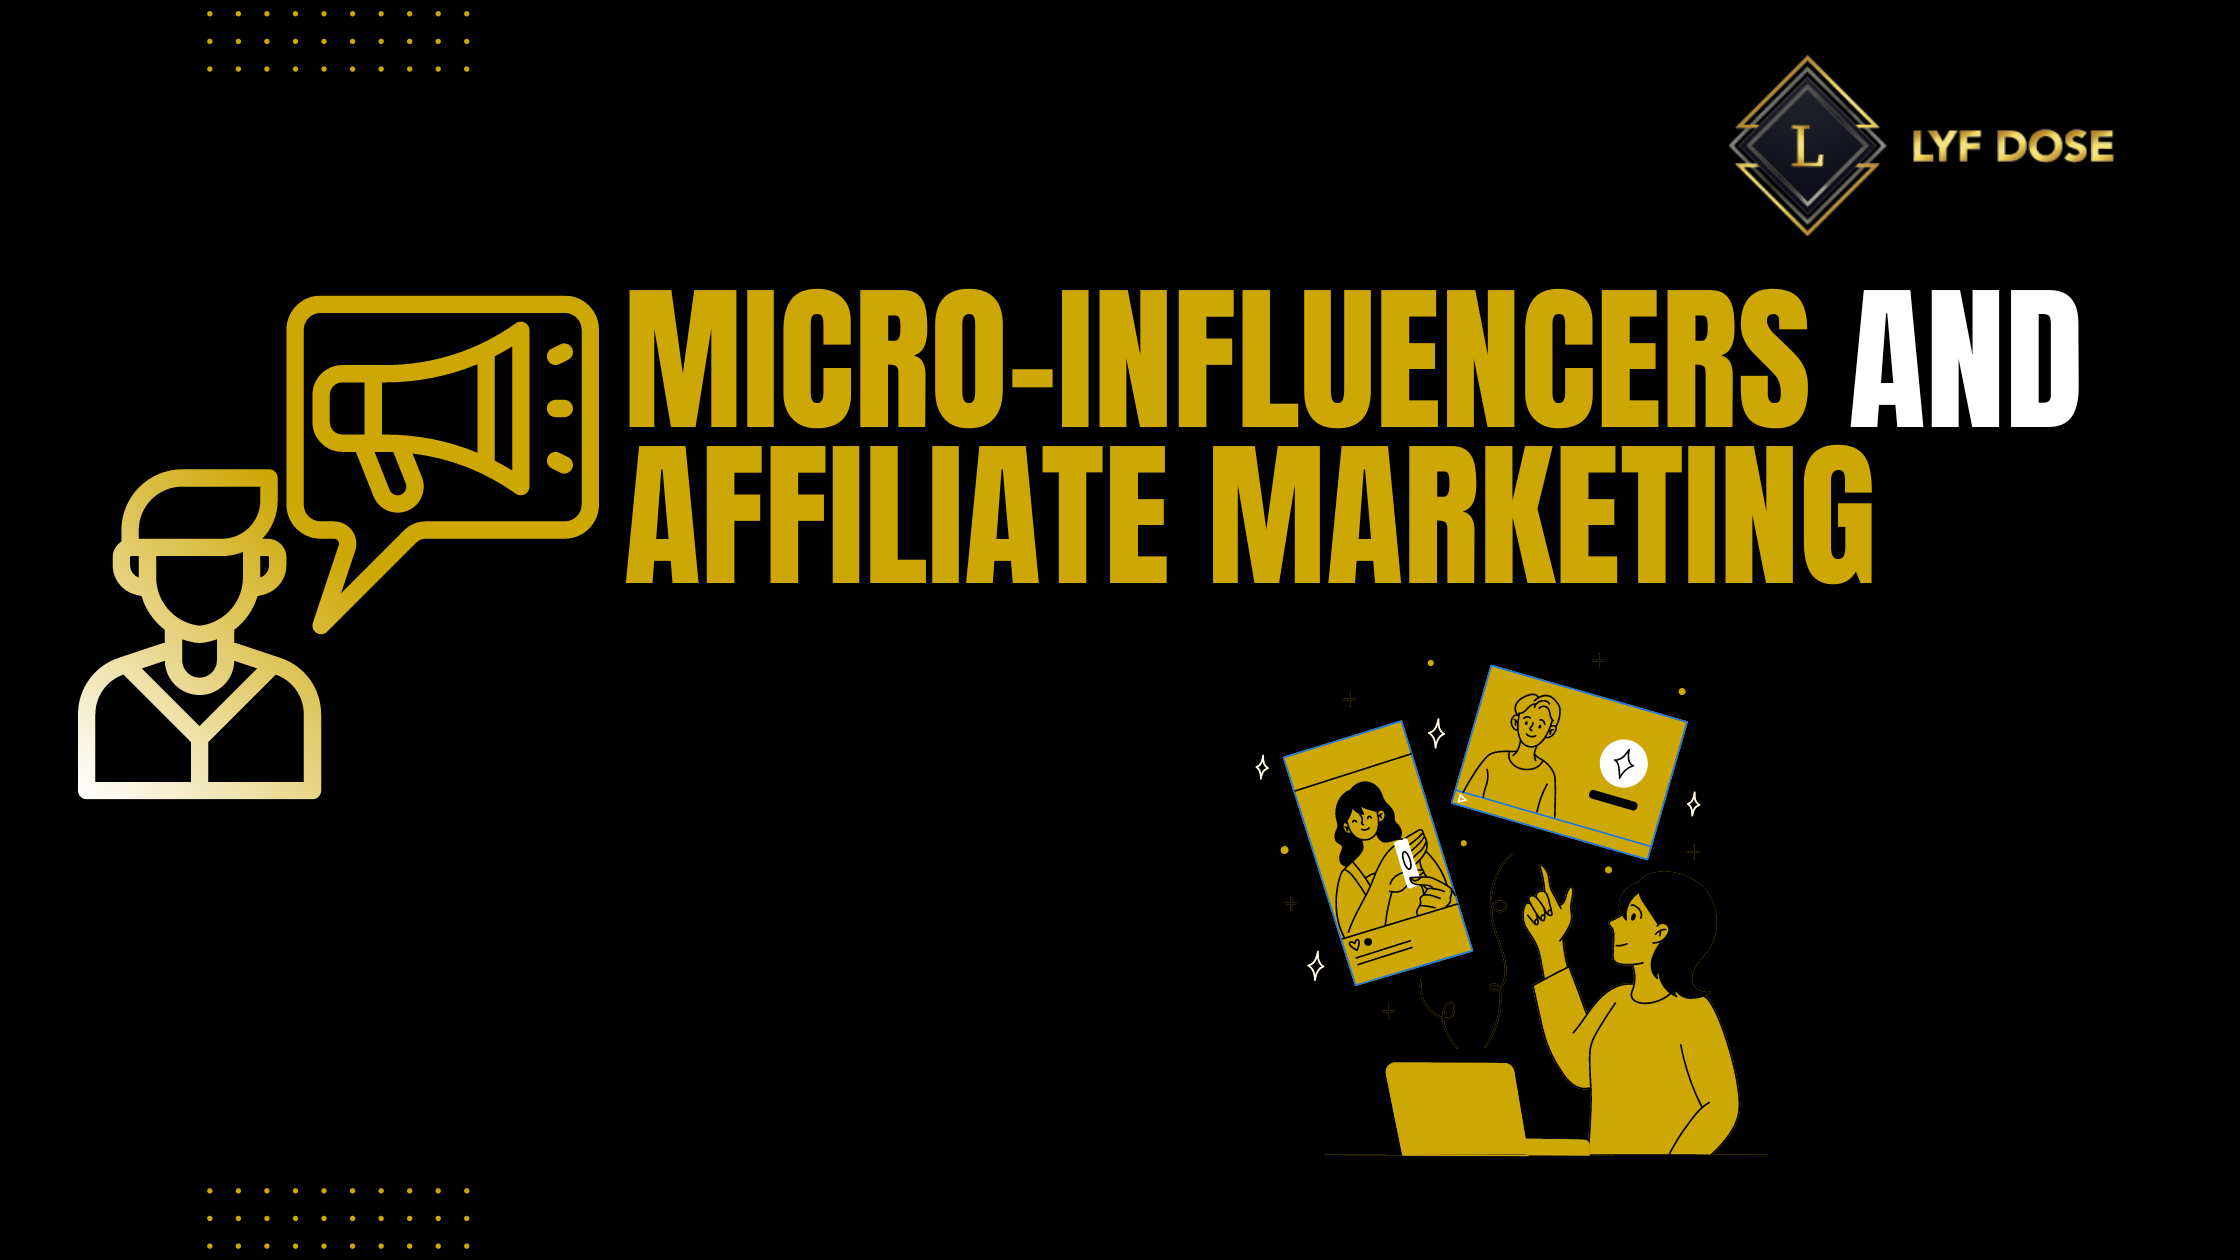 Micro-influencers and affiliate marketing